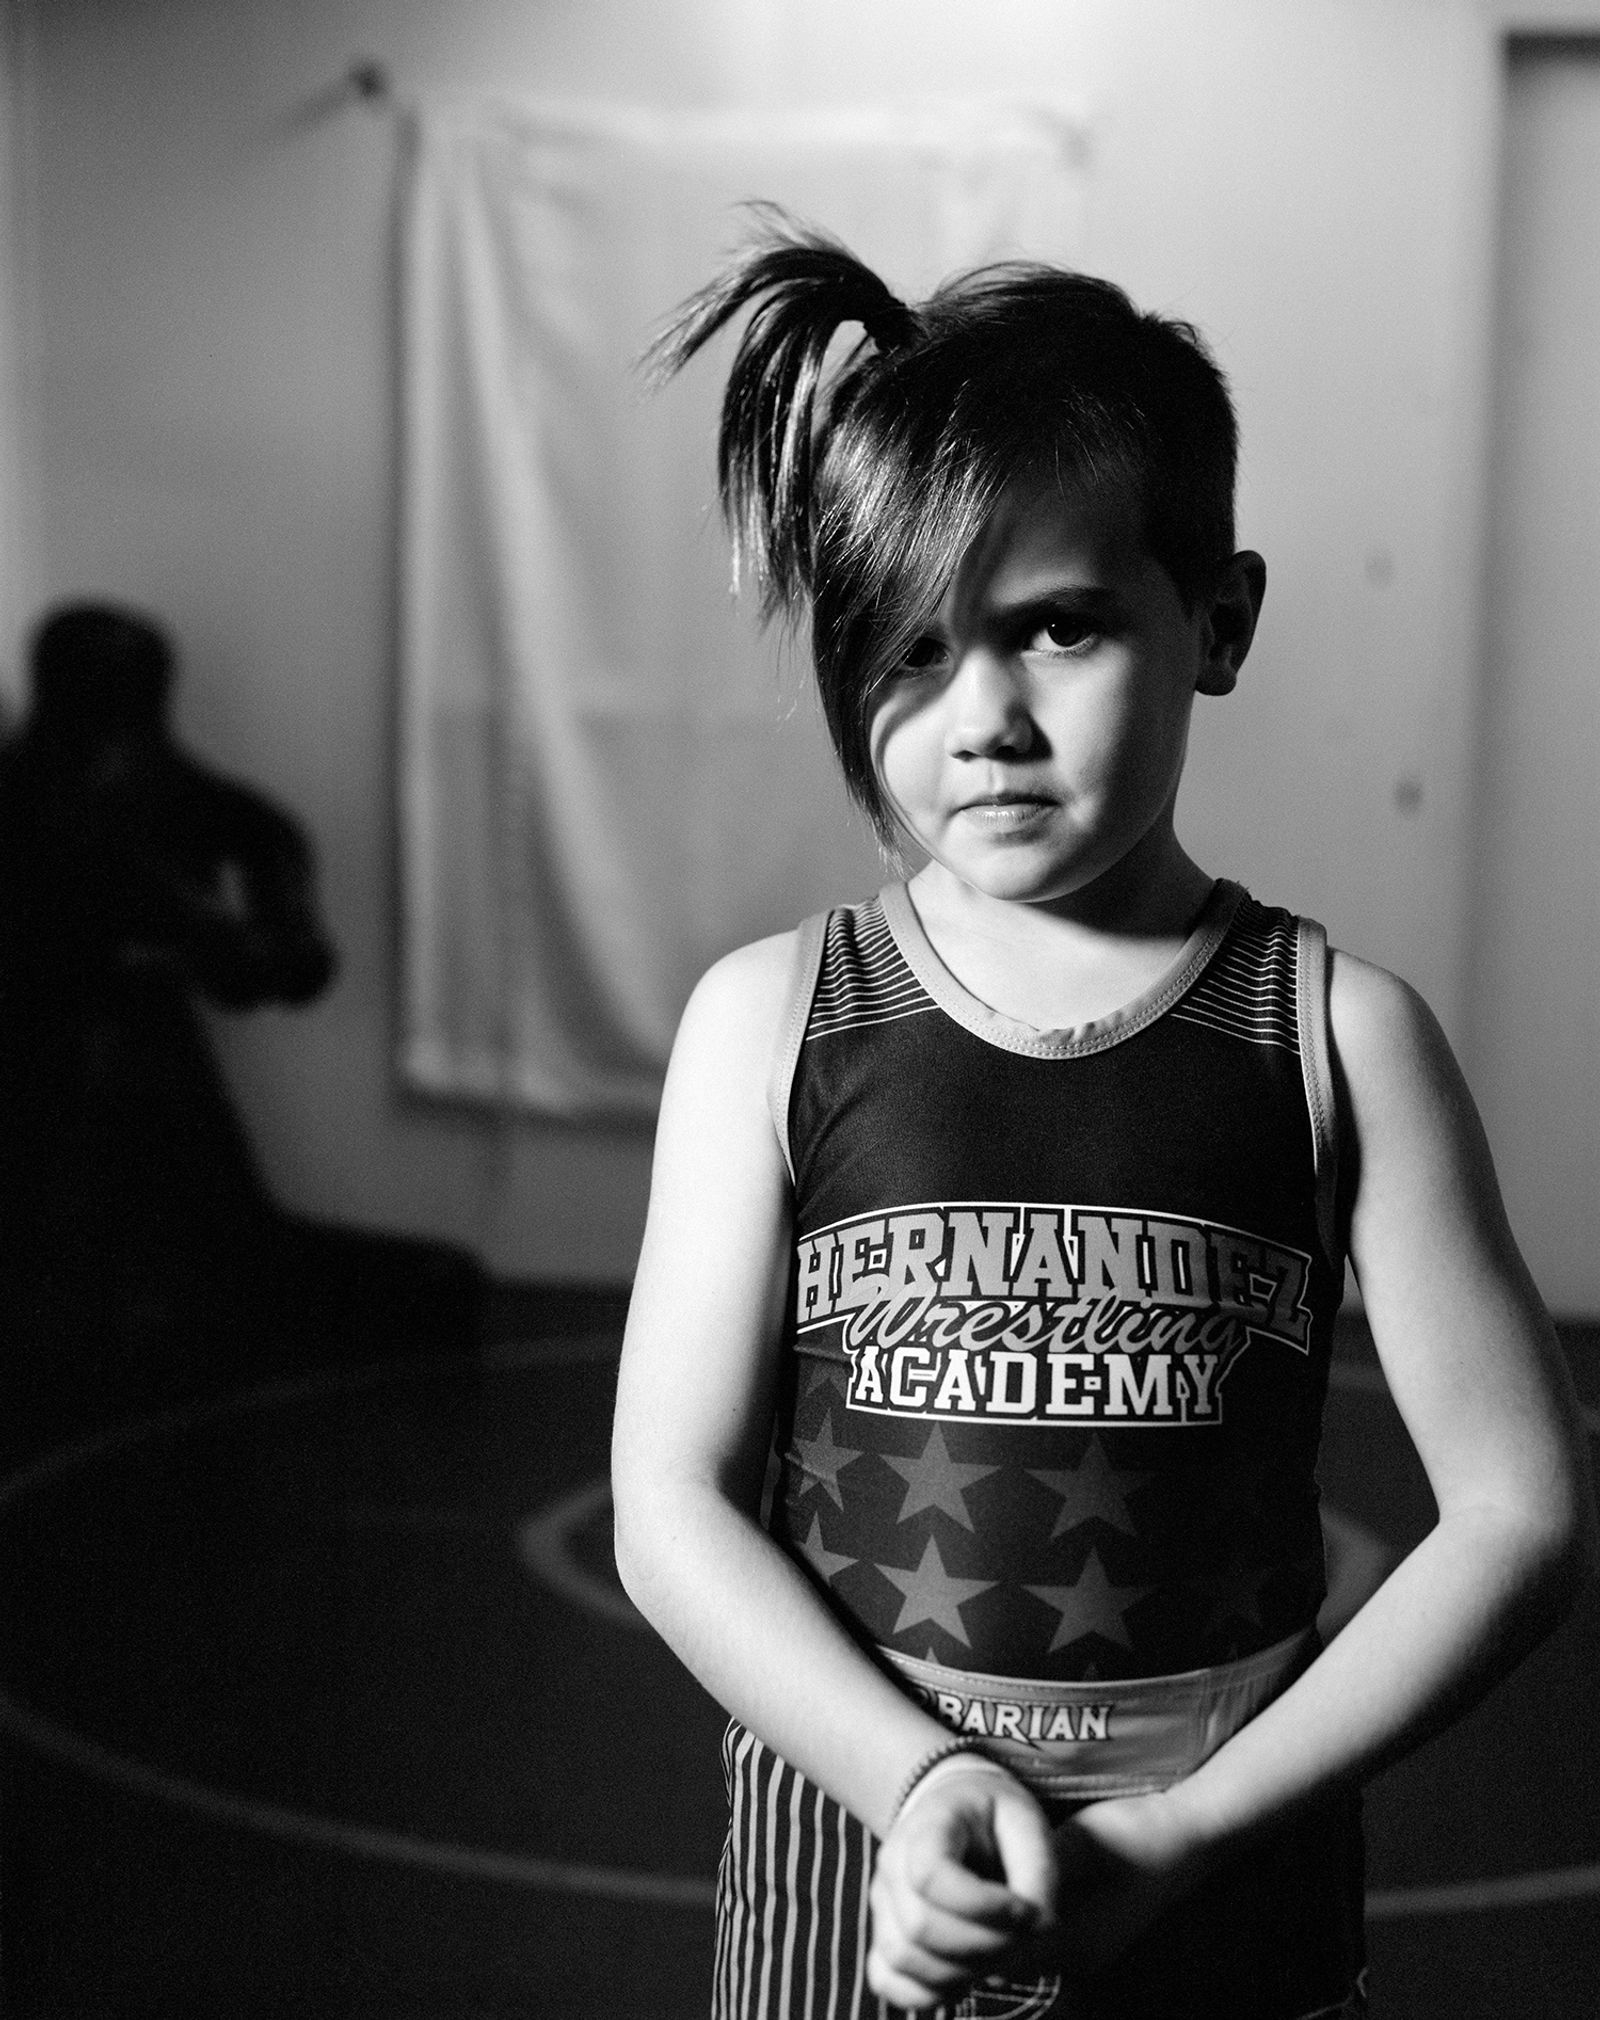 © Rachel Jessen - Image from the GIRL WRESTLE photography project